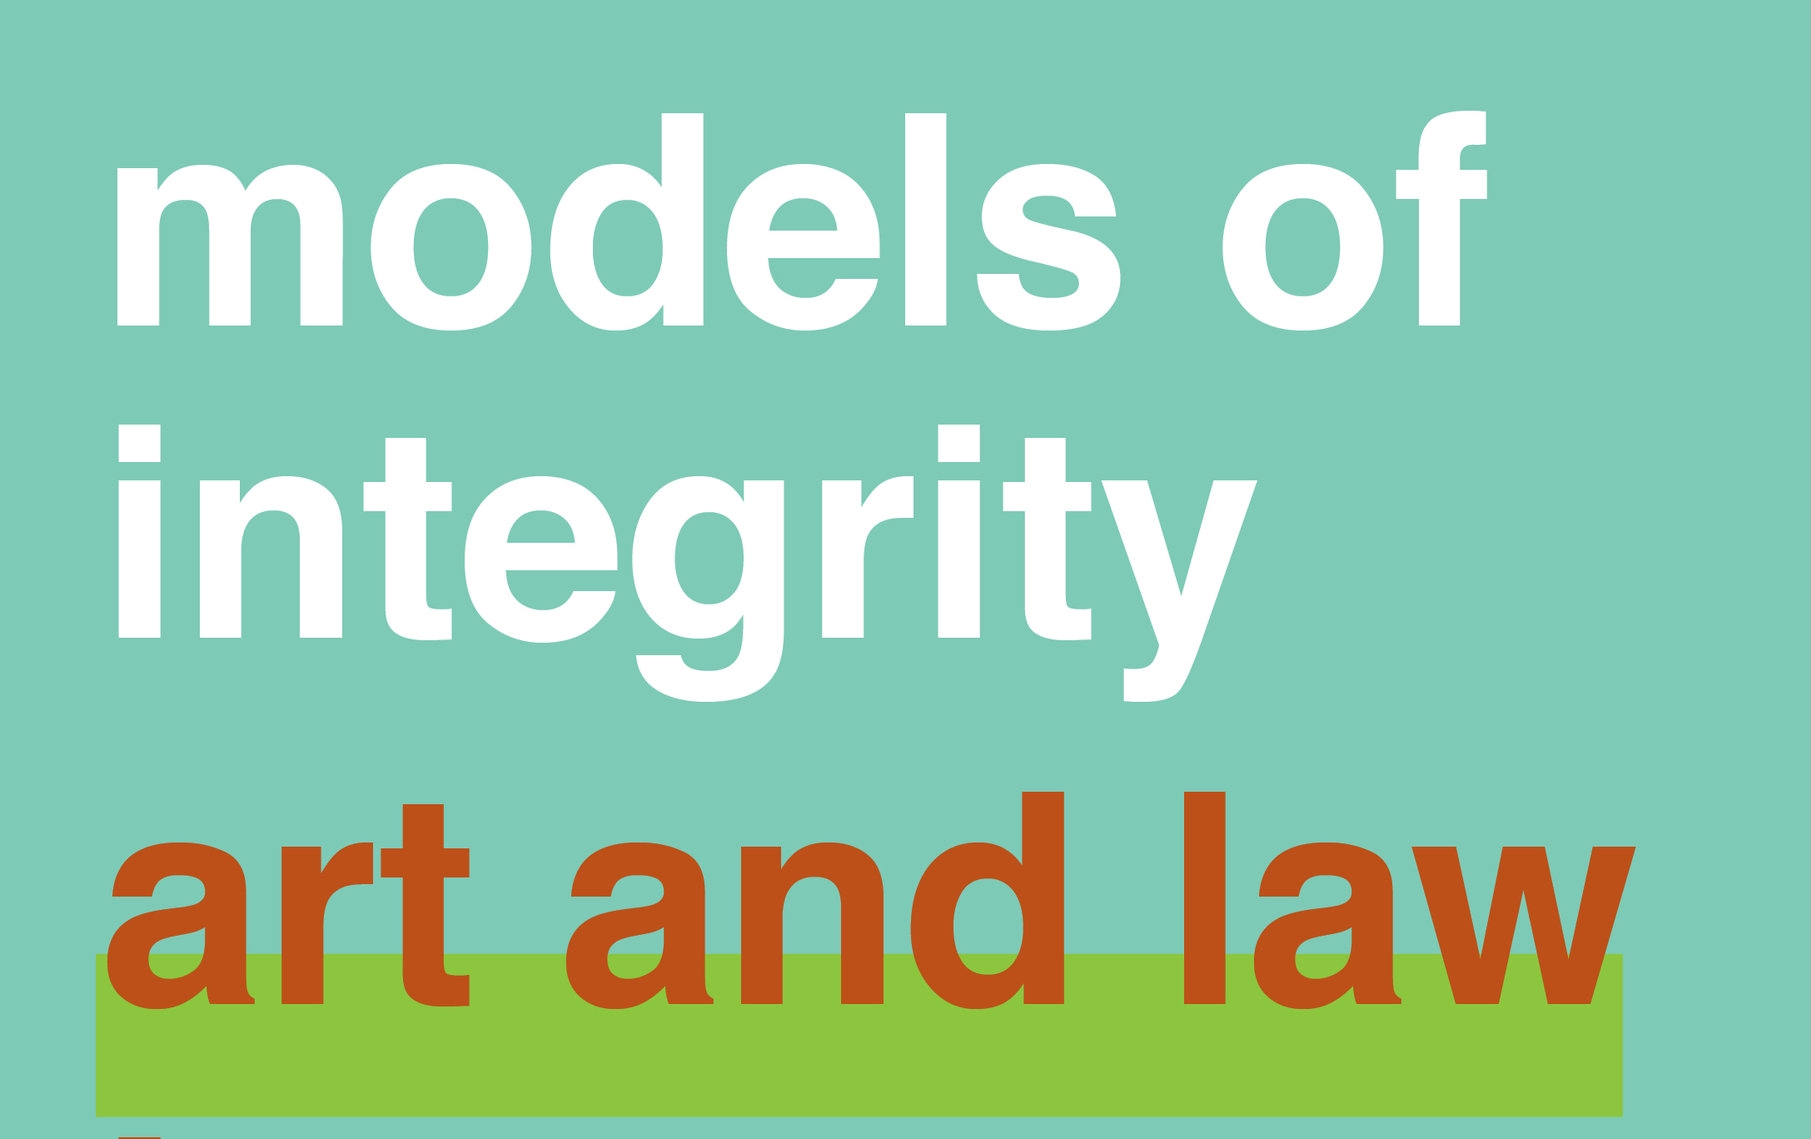 Book cover for "models of integrity art and low in post-sixties america" with a light green background